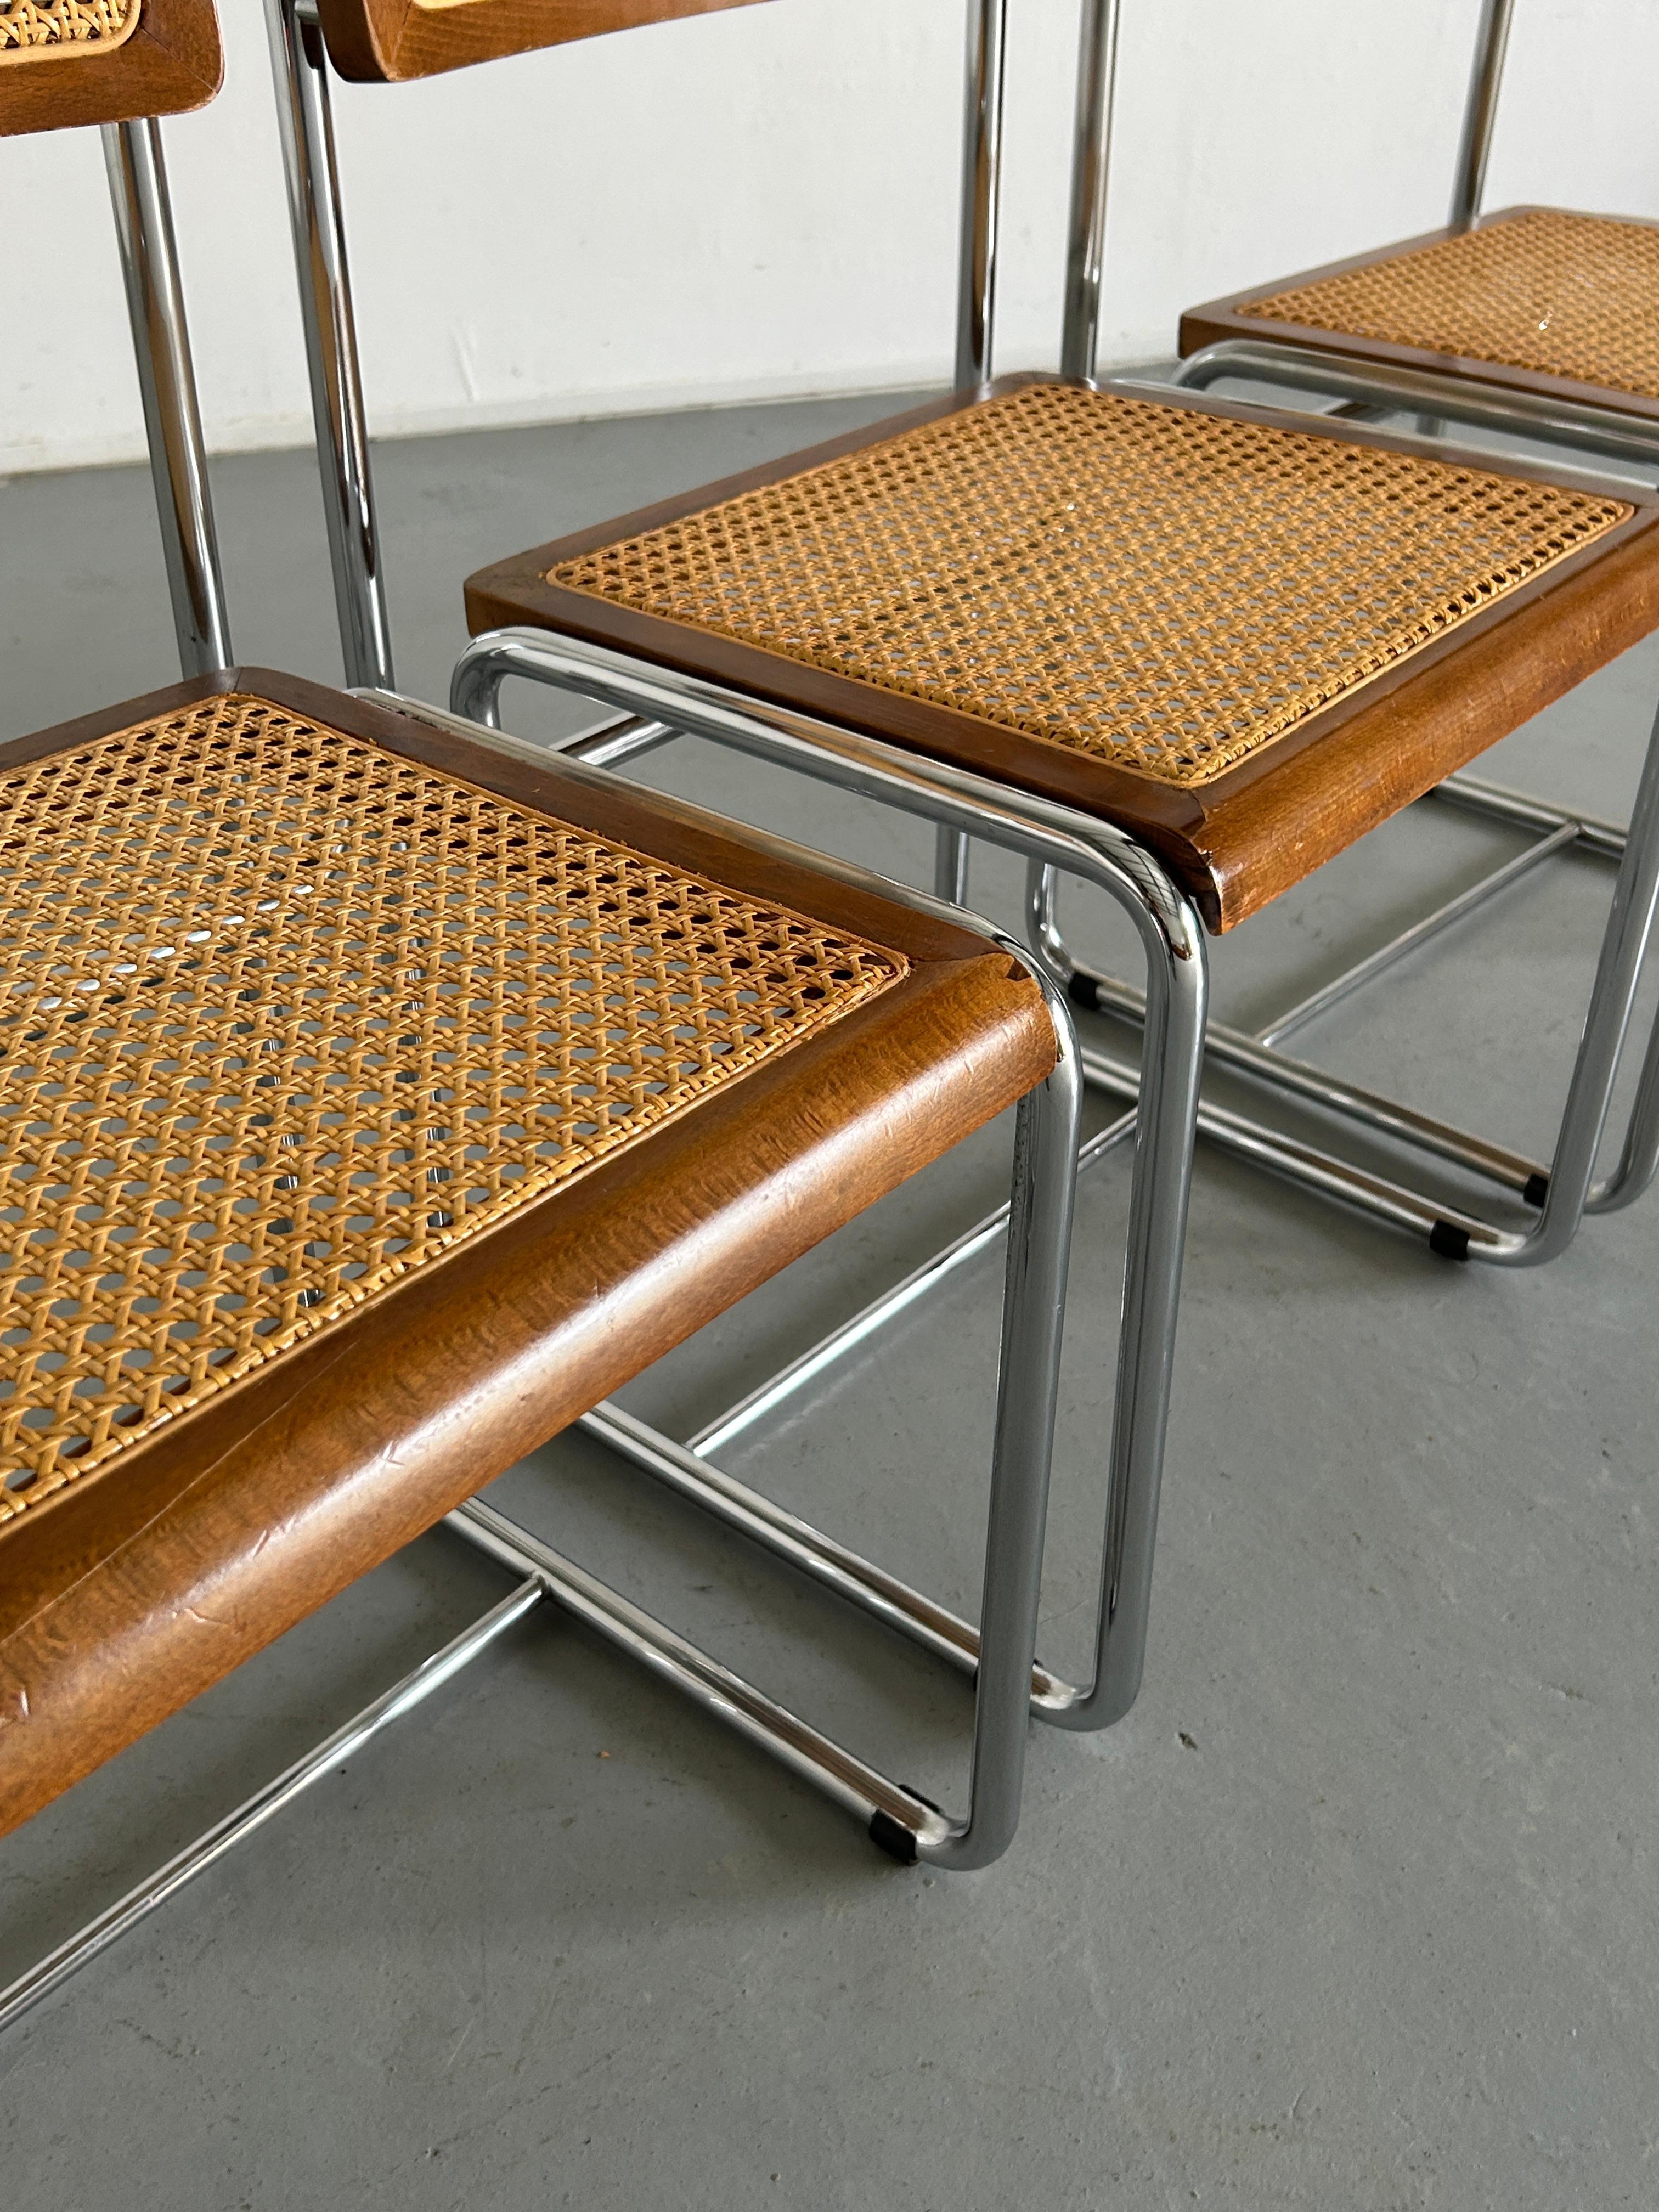 Set of 4 Mid-Century Dining Chairs in Bent Tubular Steel and Wicker Cane, 1960s For Sale 8